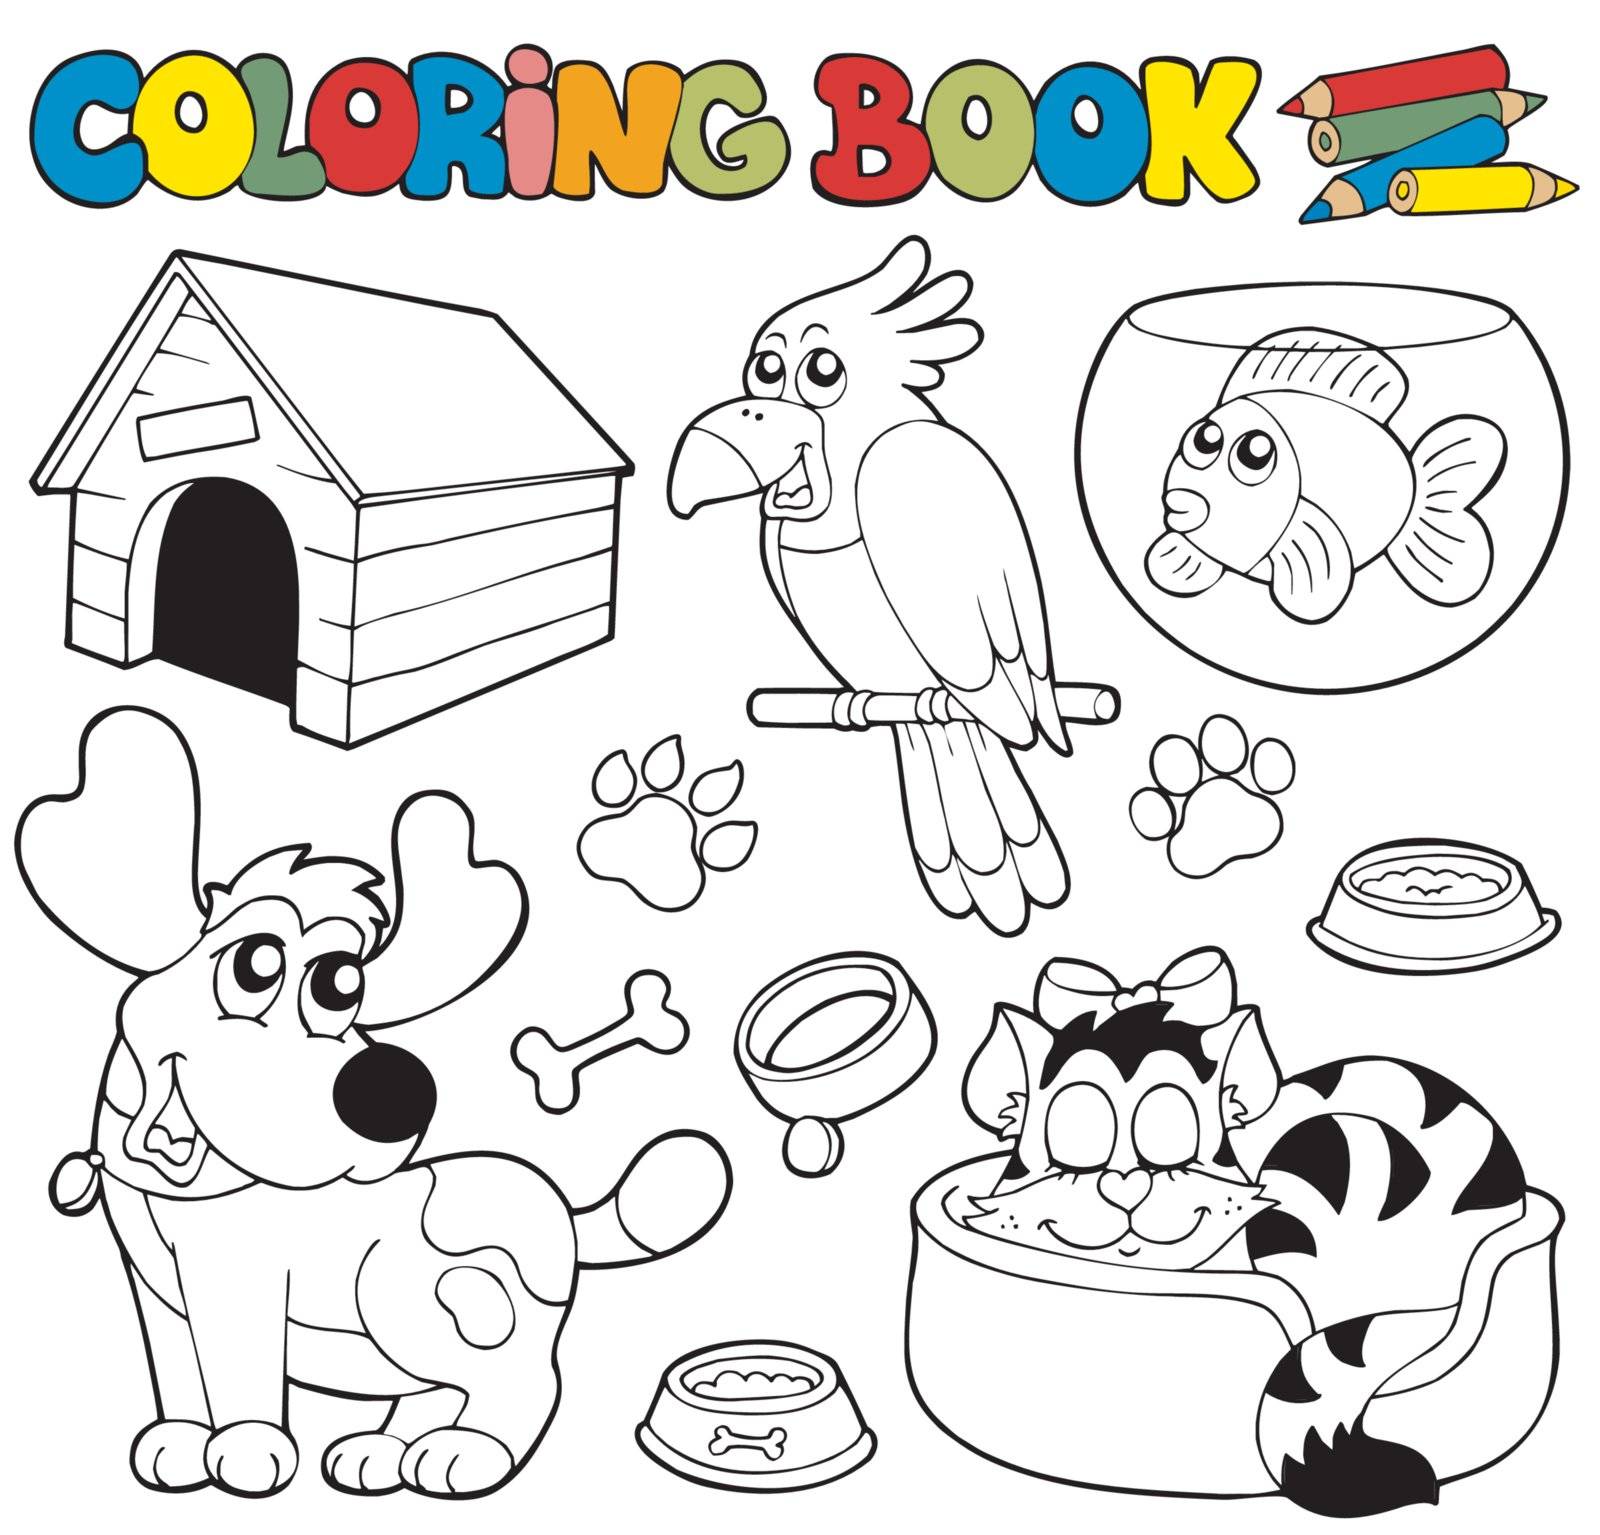 Coloring book with pets 1 - vector illustration.